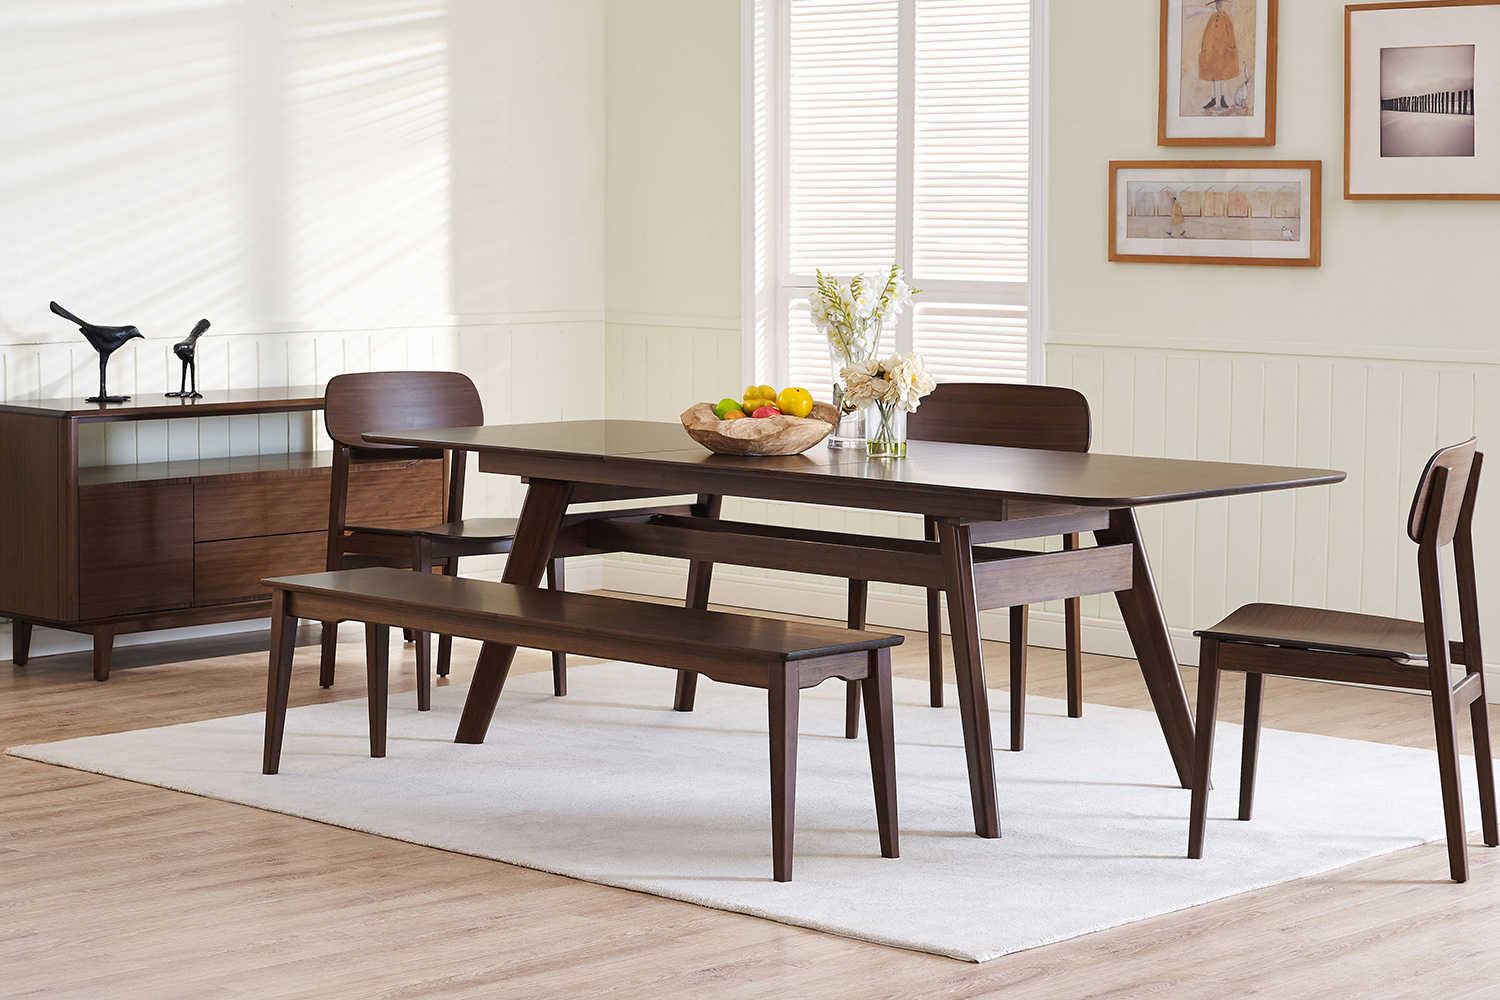 Greenington Currant Extendable Dining Table is a modern and comfortable table for your dinners